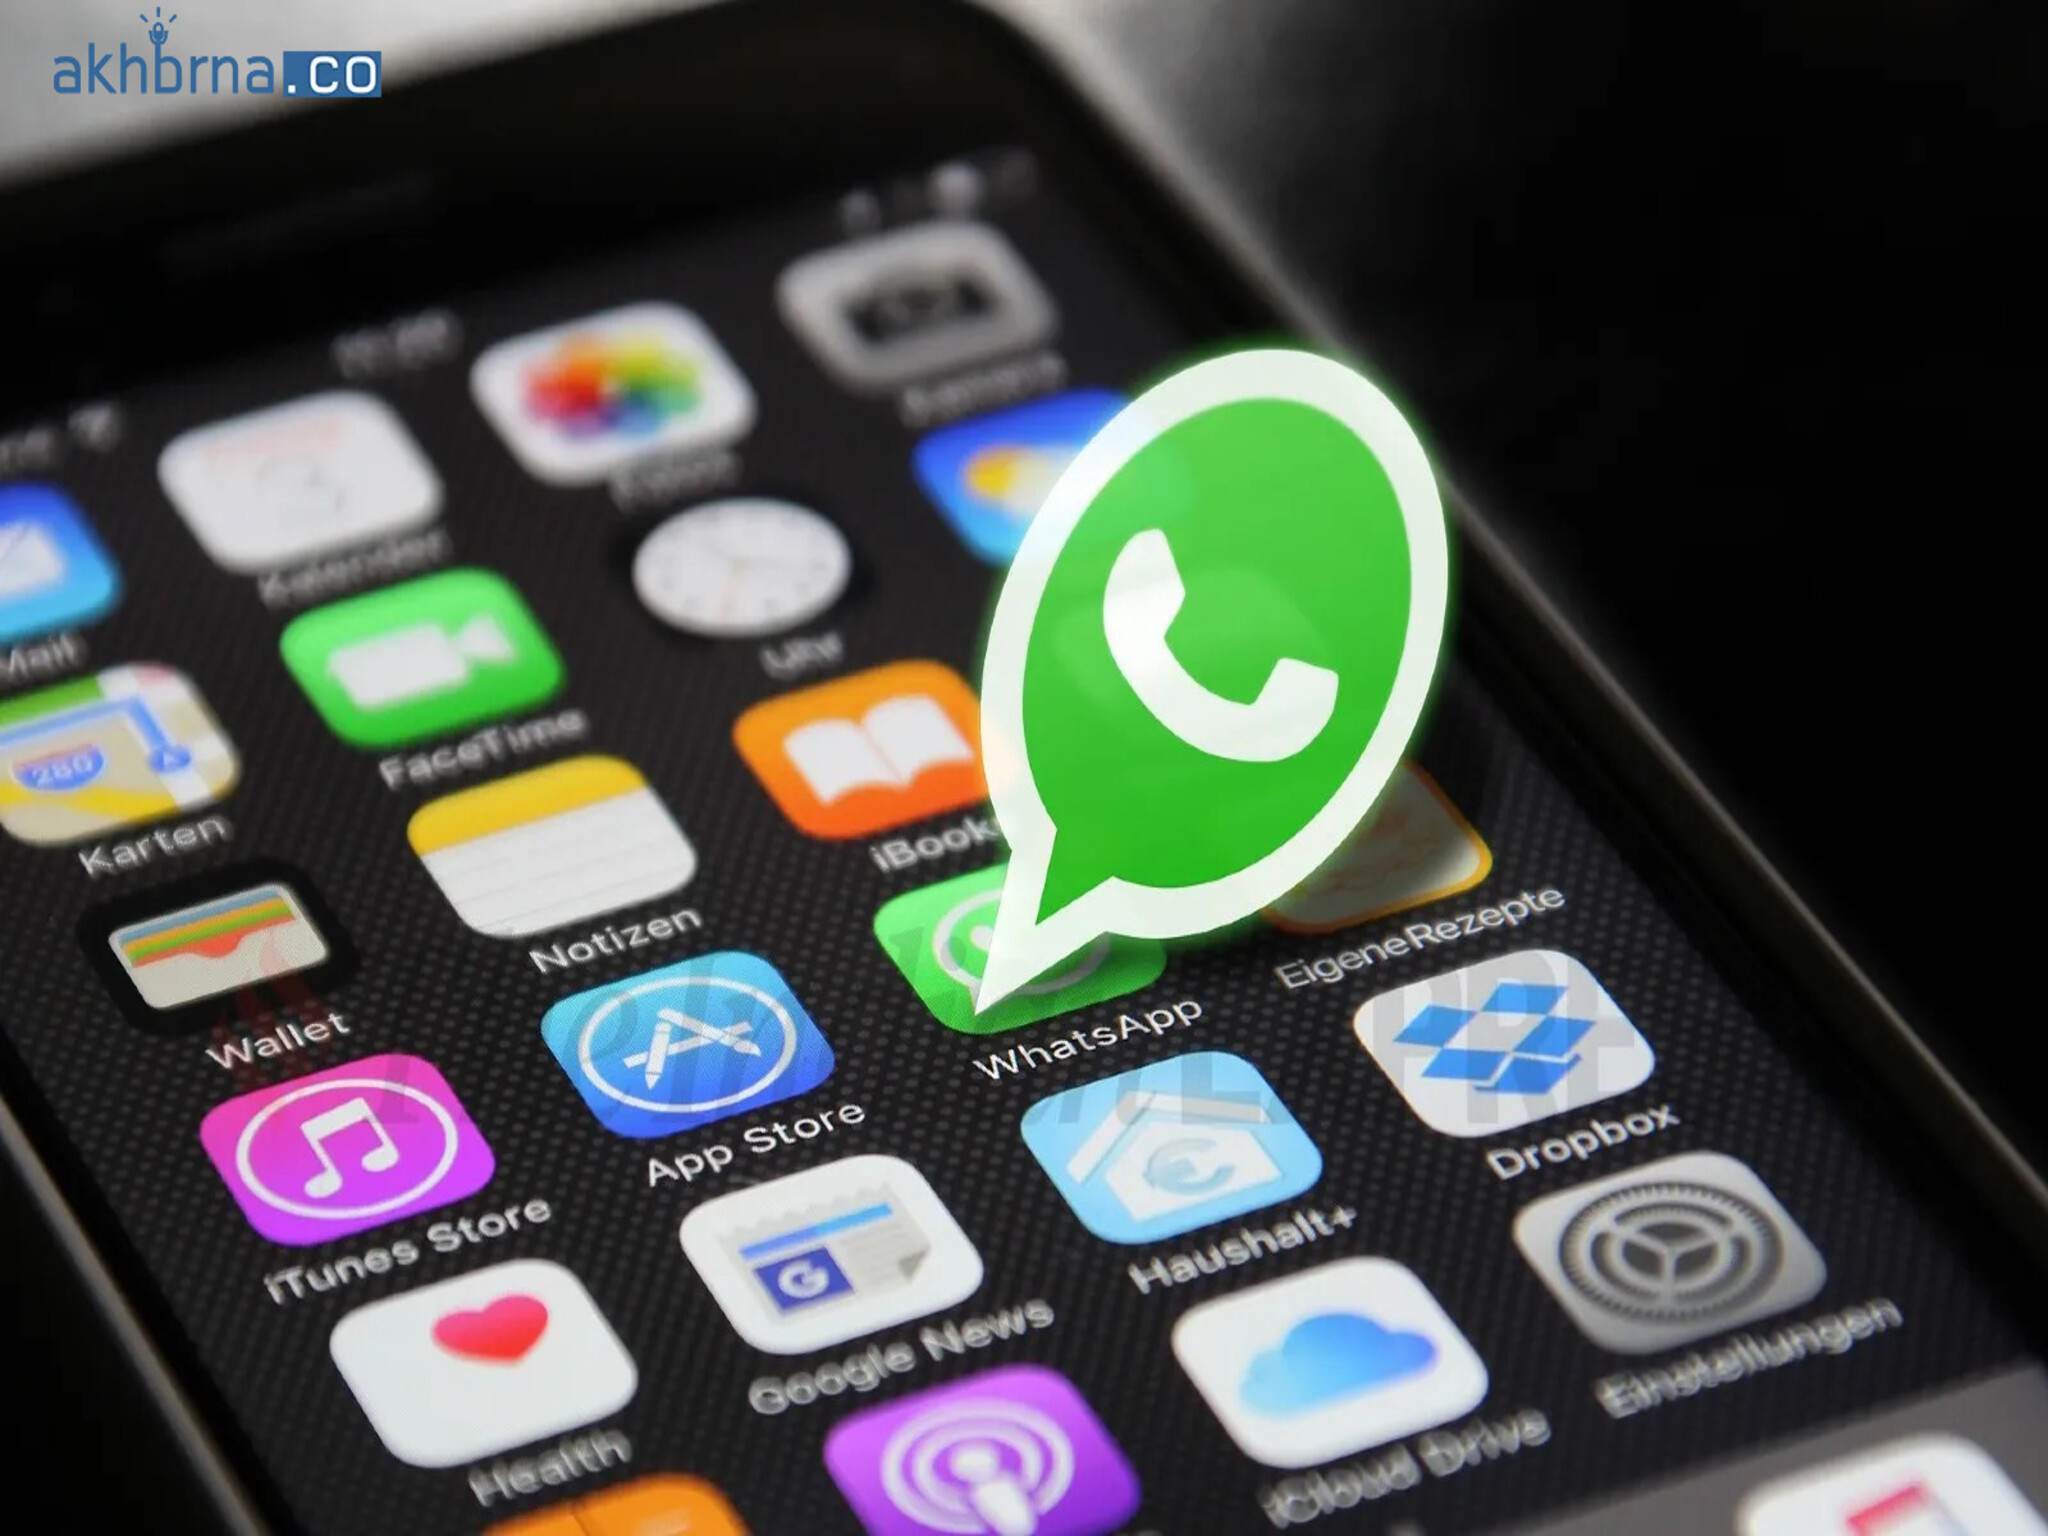 UAE Experts warn of WhatsApp job scams and "smishing" targeting residents